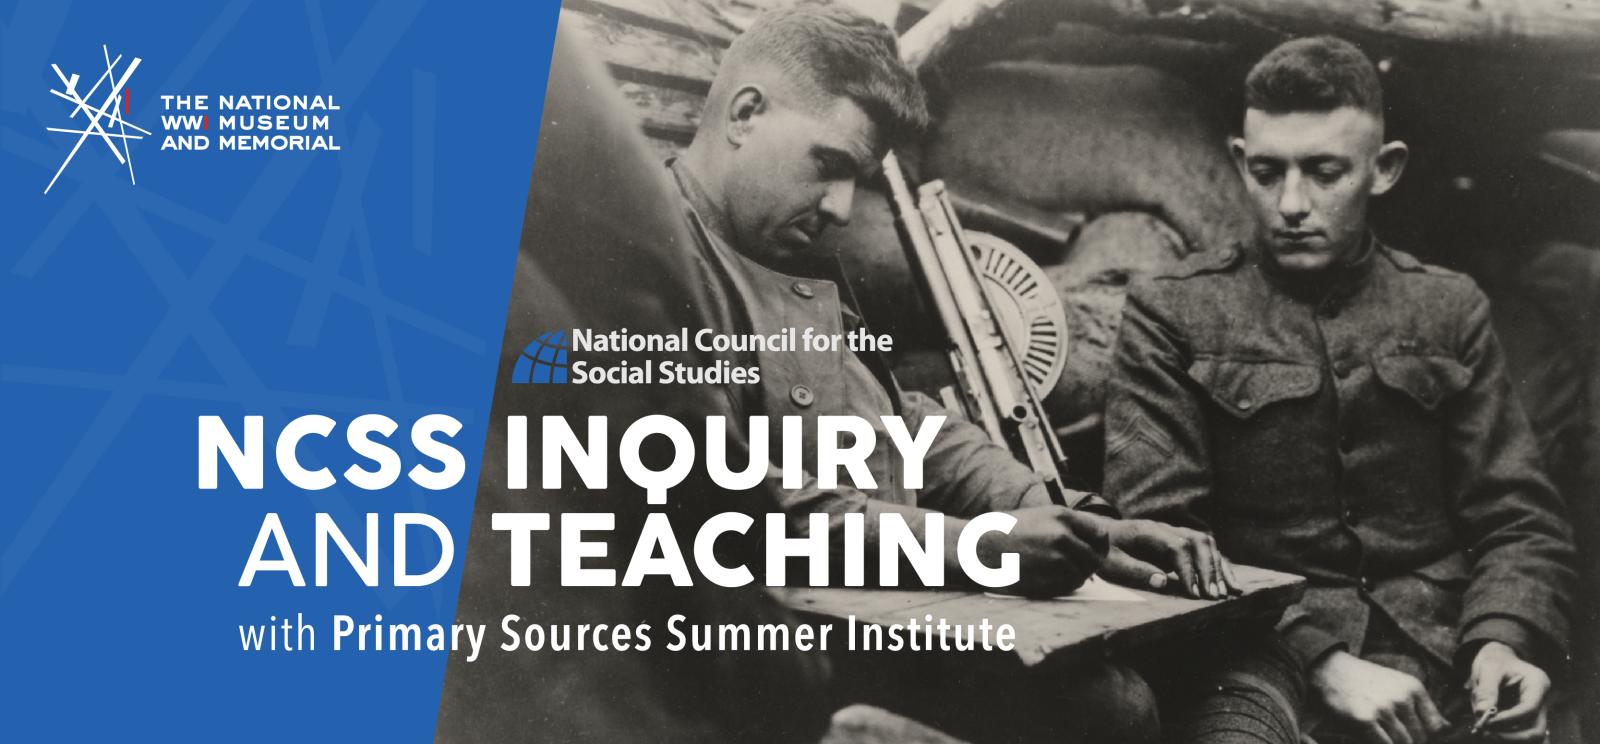 Image: two young white men in WWI uniform sitting in a trench. One of them is writing a letter on a lap desk. Text: NCSS Inquiry and Teaching with Primary Sources Summer Institute